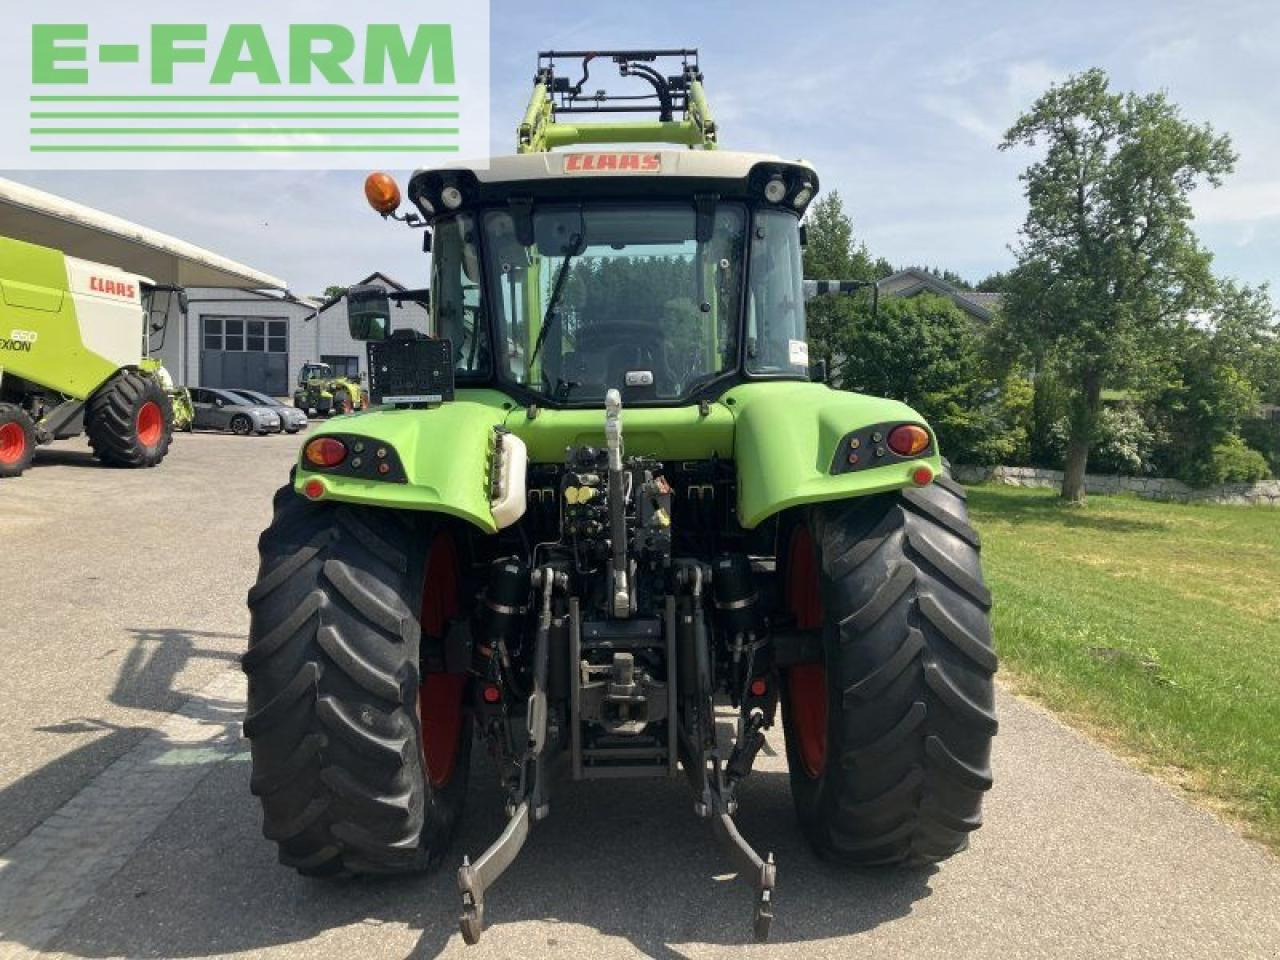 Farm tractor CLAAS arion 450 cis panoramic